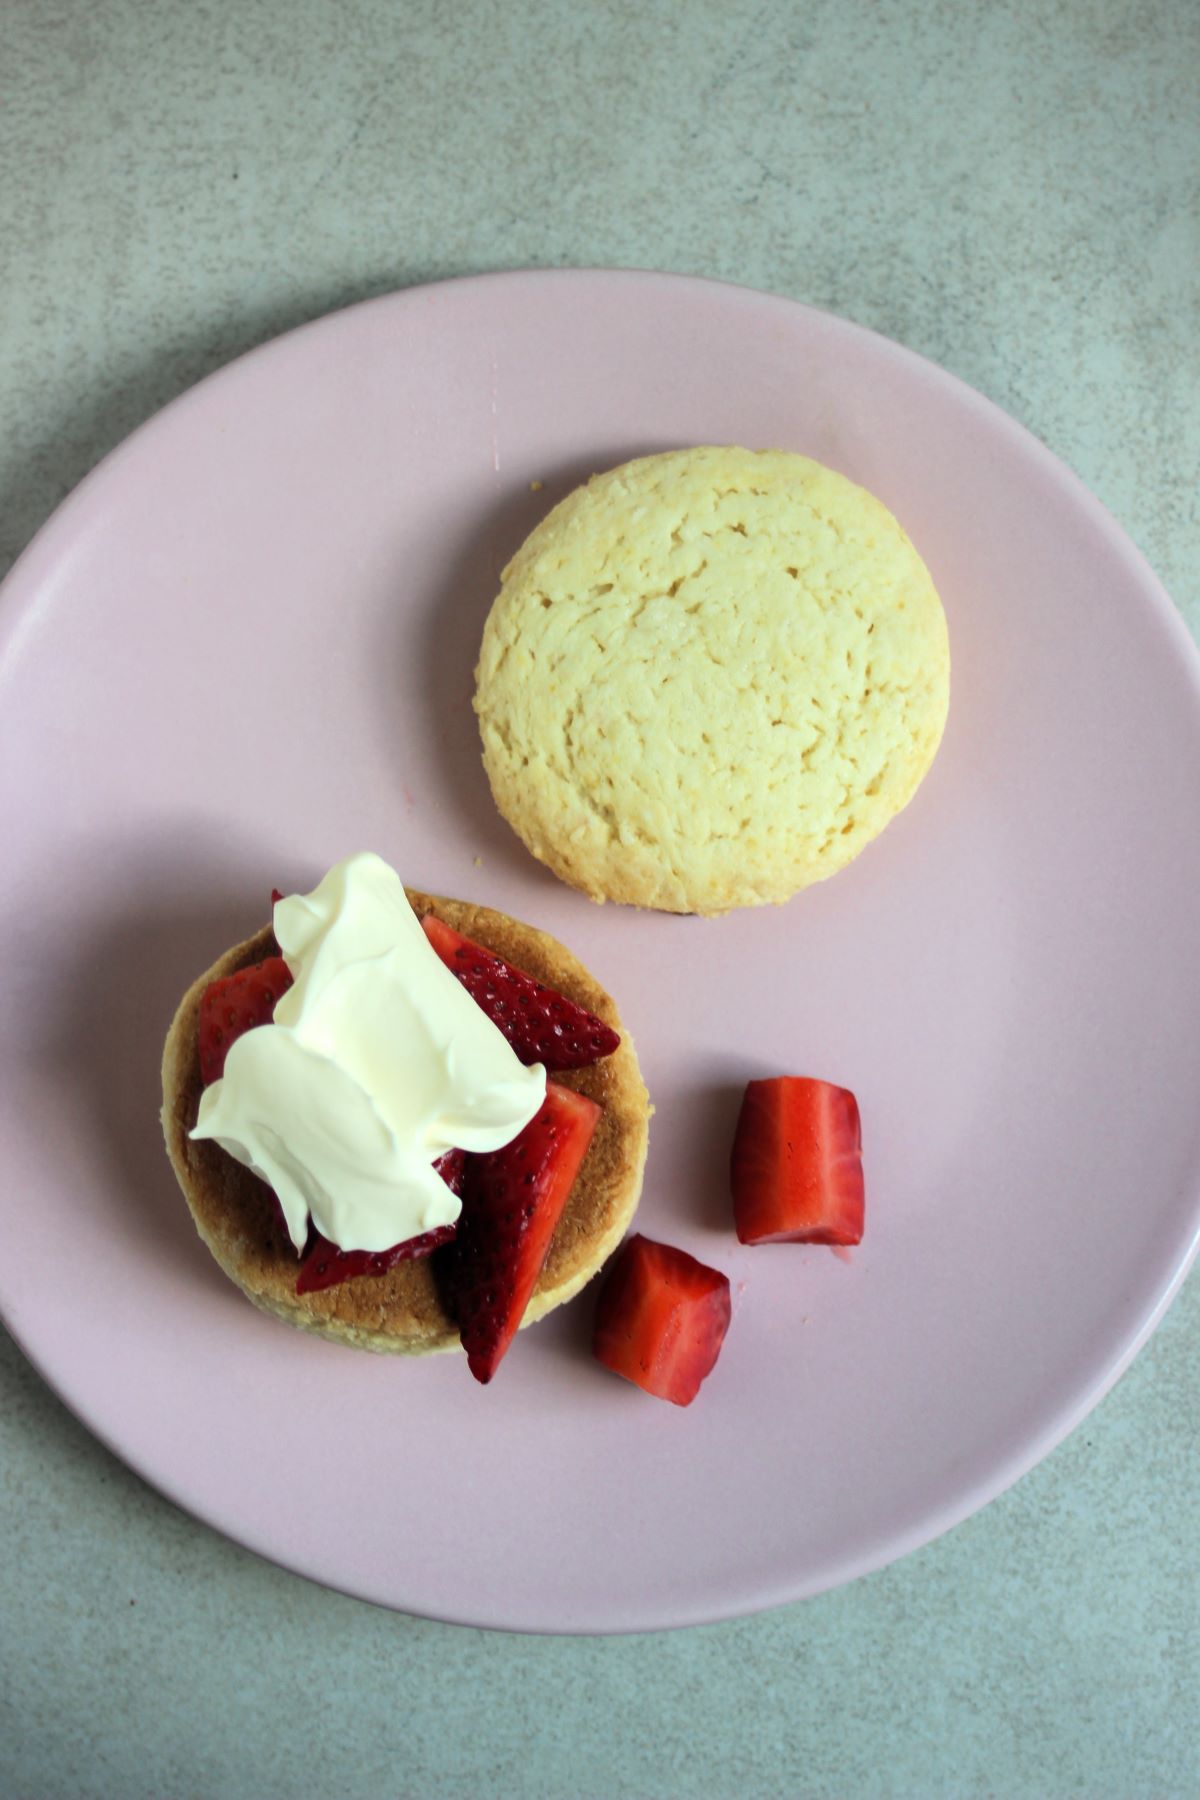 Shortcake assembly. Two biscuits of a shortcake on a pink plate, one with strawberries and cream.